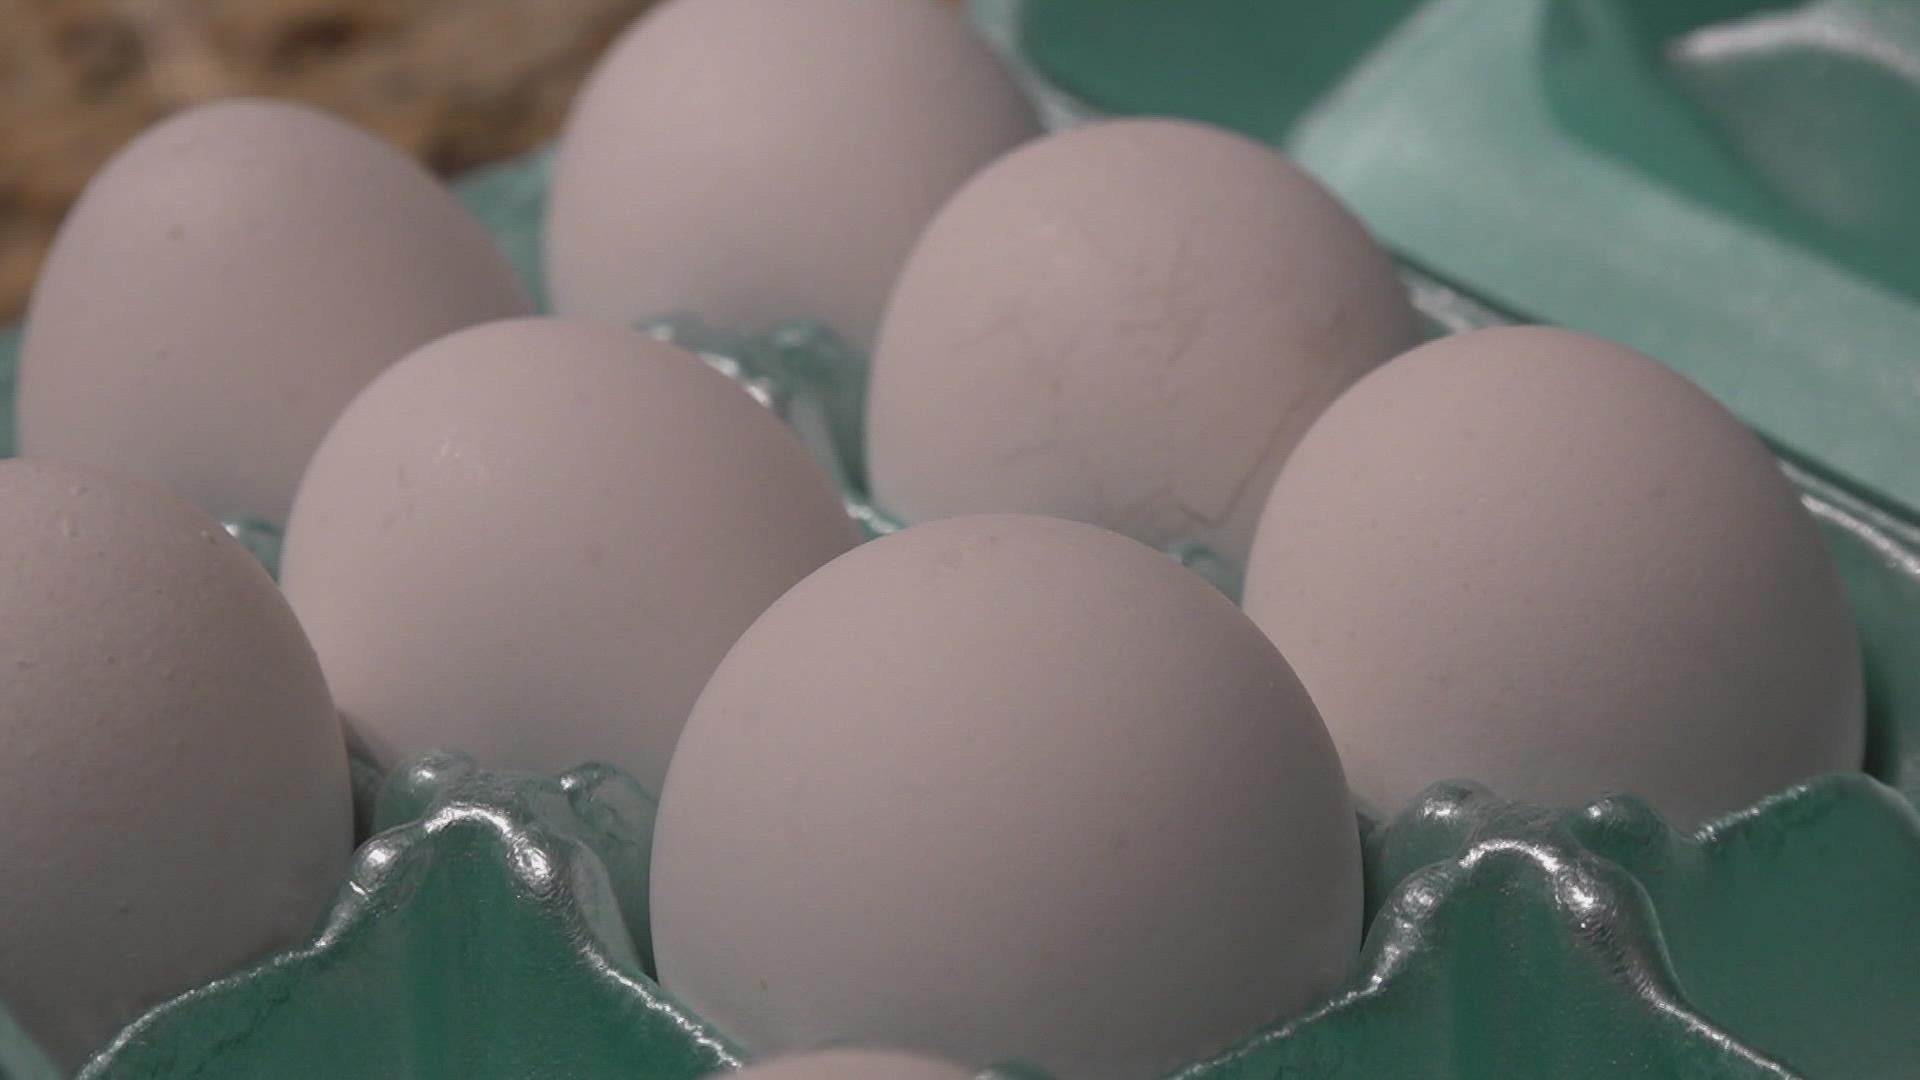 Egg prices have reached record highs and they may not come down anytime soon.